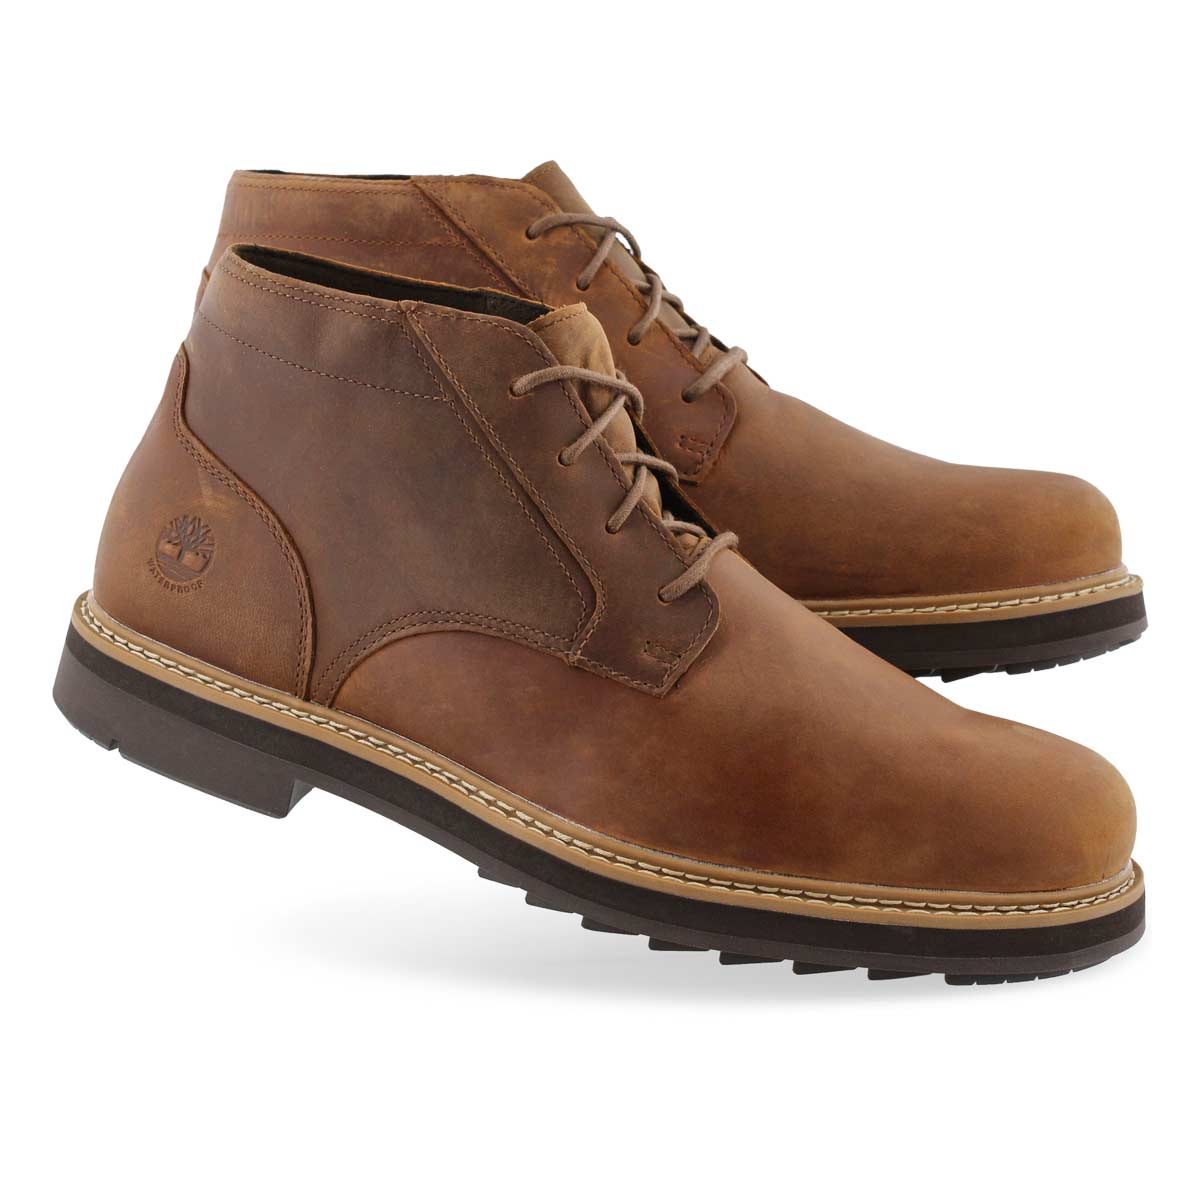 Timberland Men's SQUALL CANYON med brown wate | SoftMoc.com